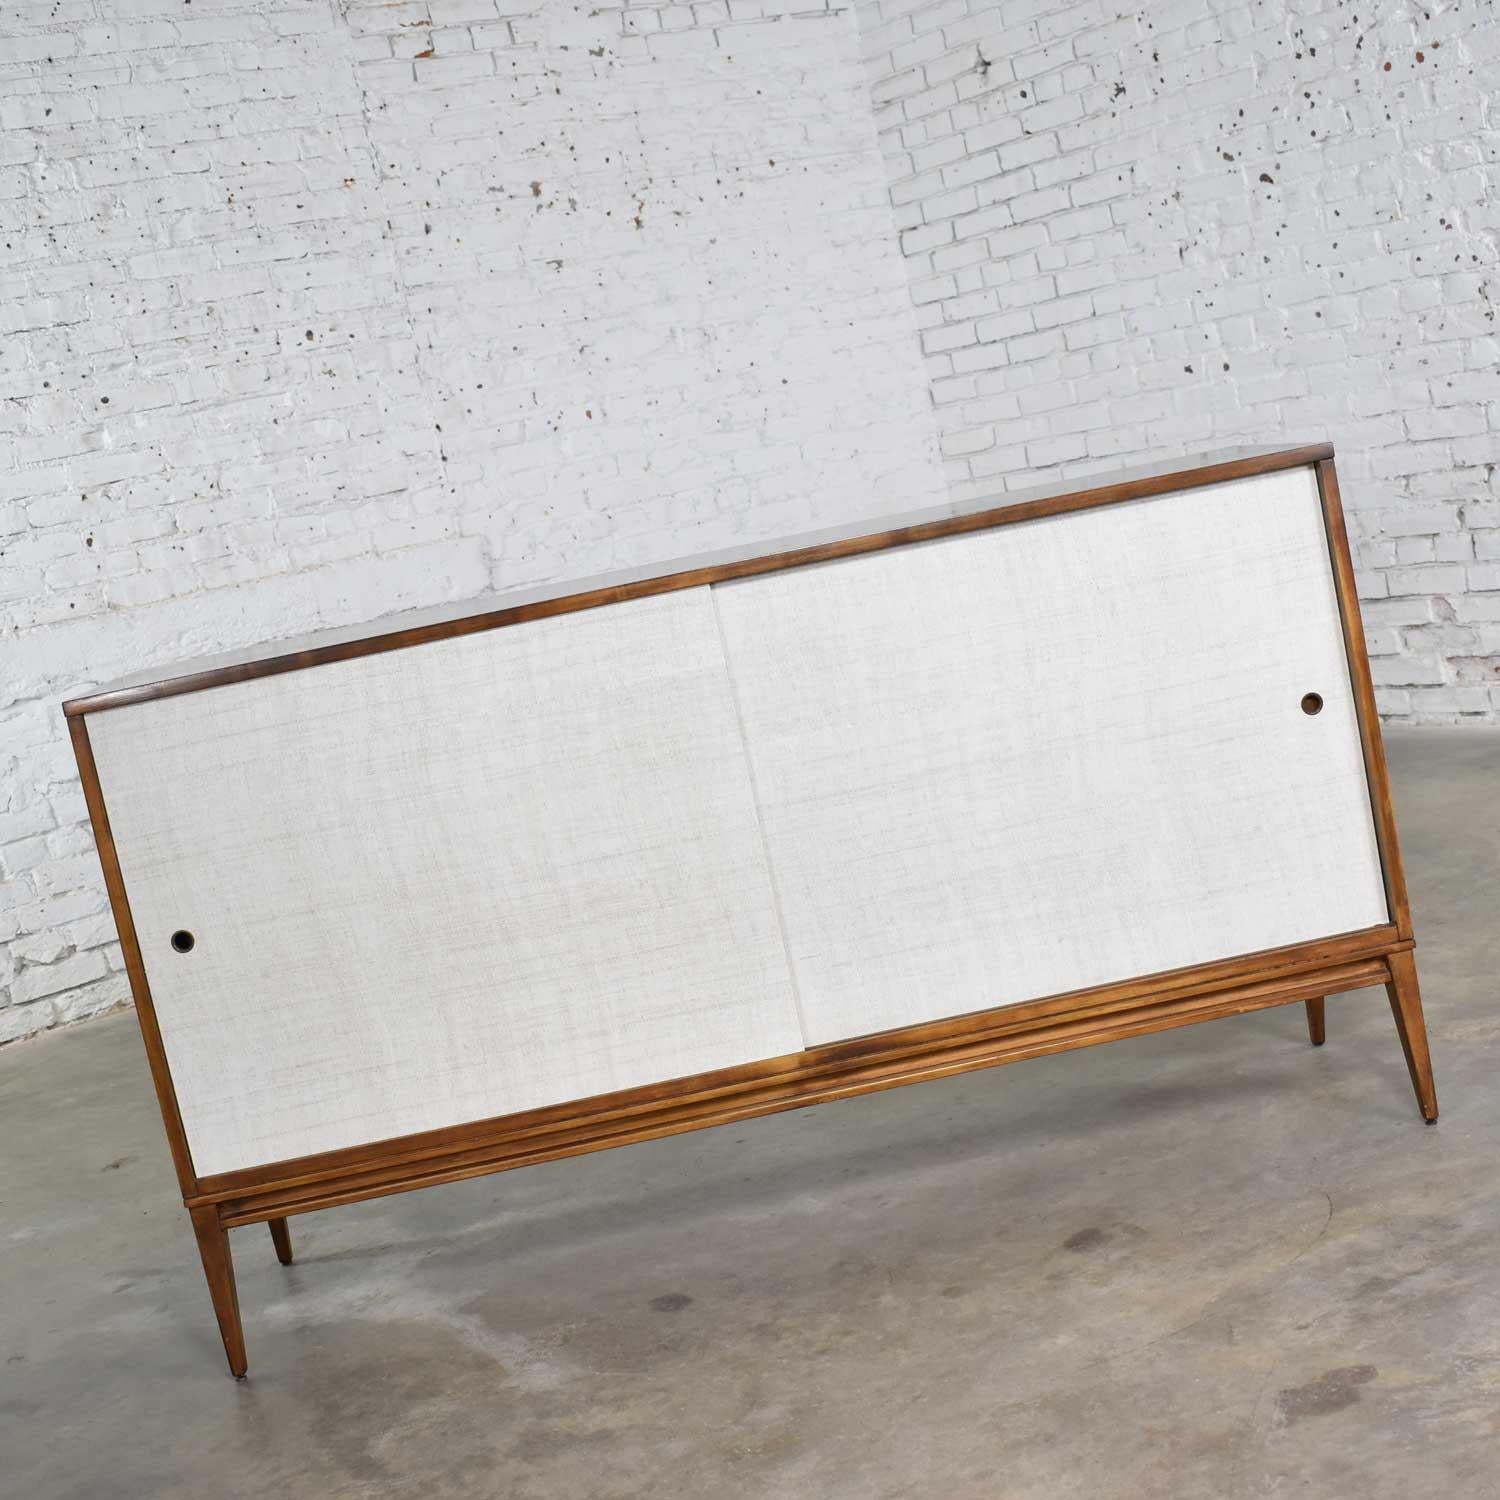 Handsome Mid-Century Modern credenza buffet cabinet #1514 designed by Paul McCobb for his Planner Group for Winchendon. It is in wonderful original vintage condition. That does not mean it is without signs of age but nothing outstanding. It has a